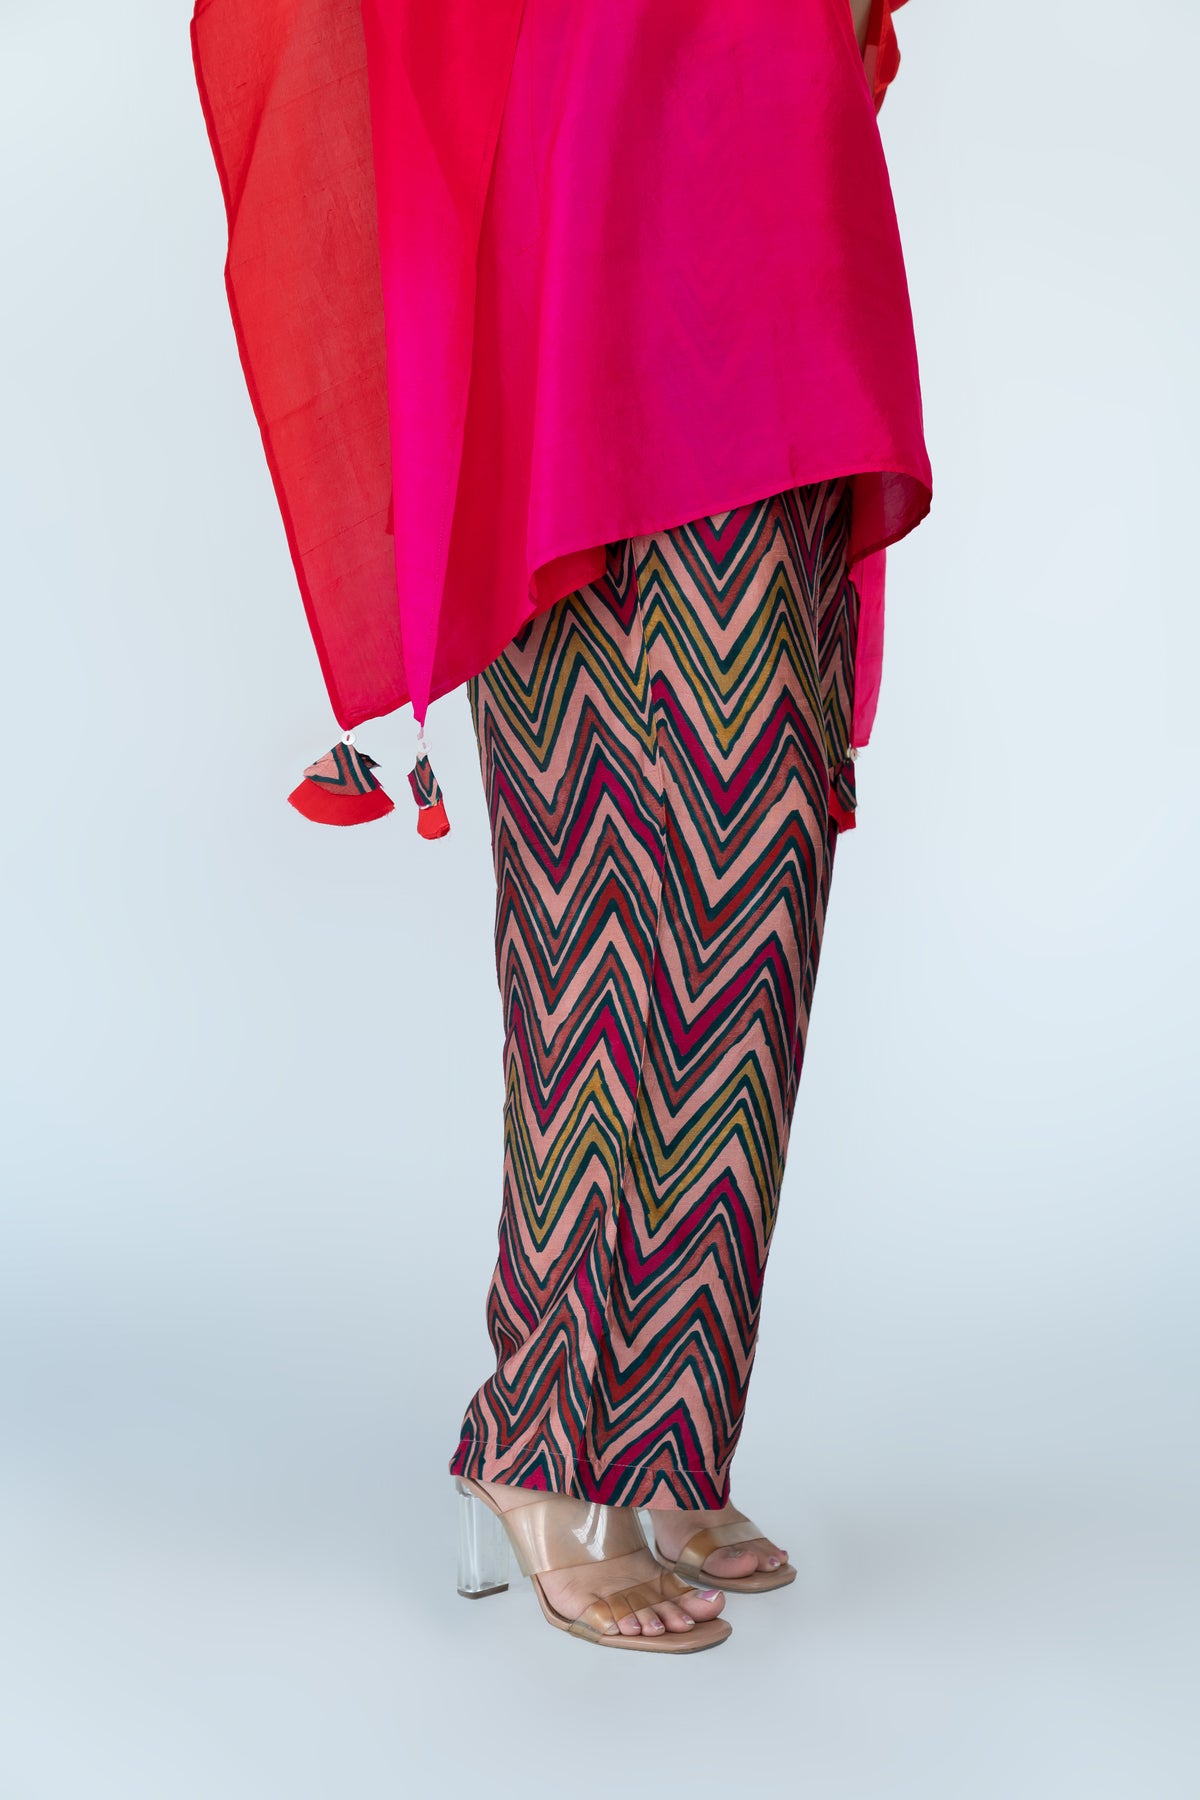 Fuschia Red Ombre Kaftan Top with Zigzag Pants (2pc)